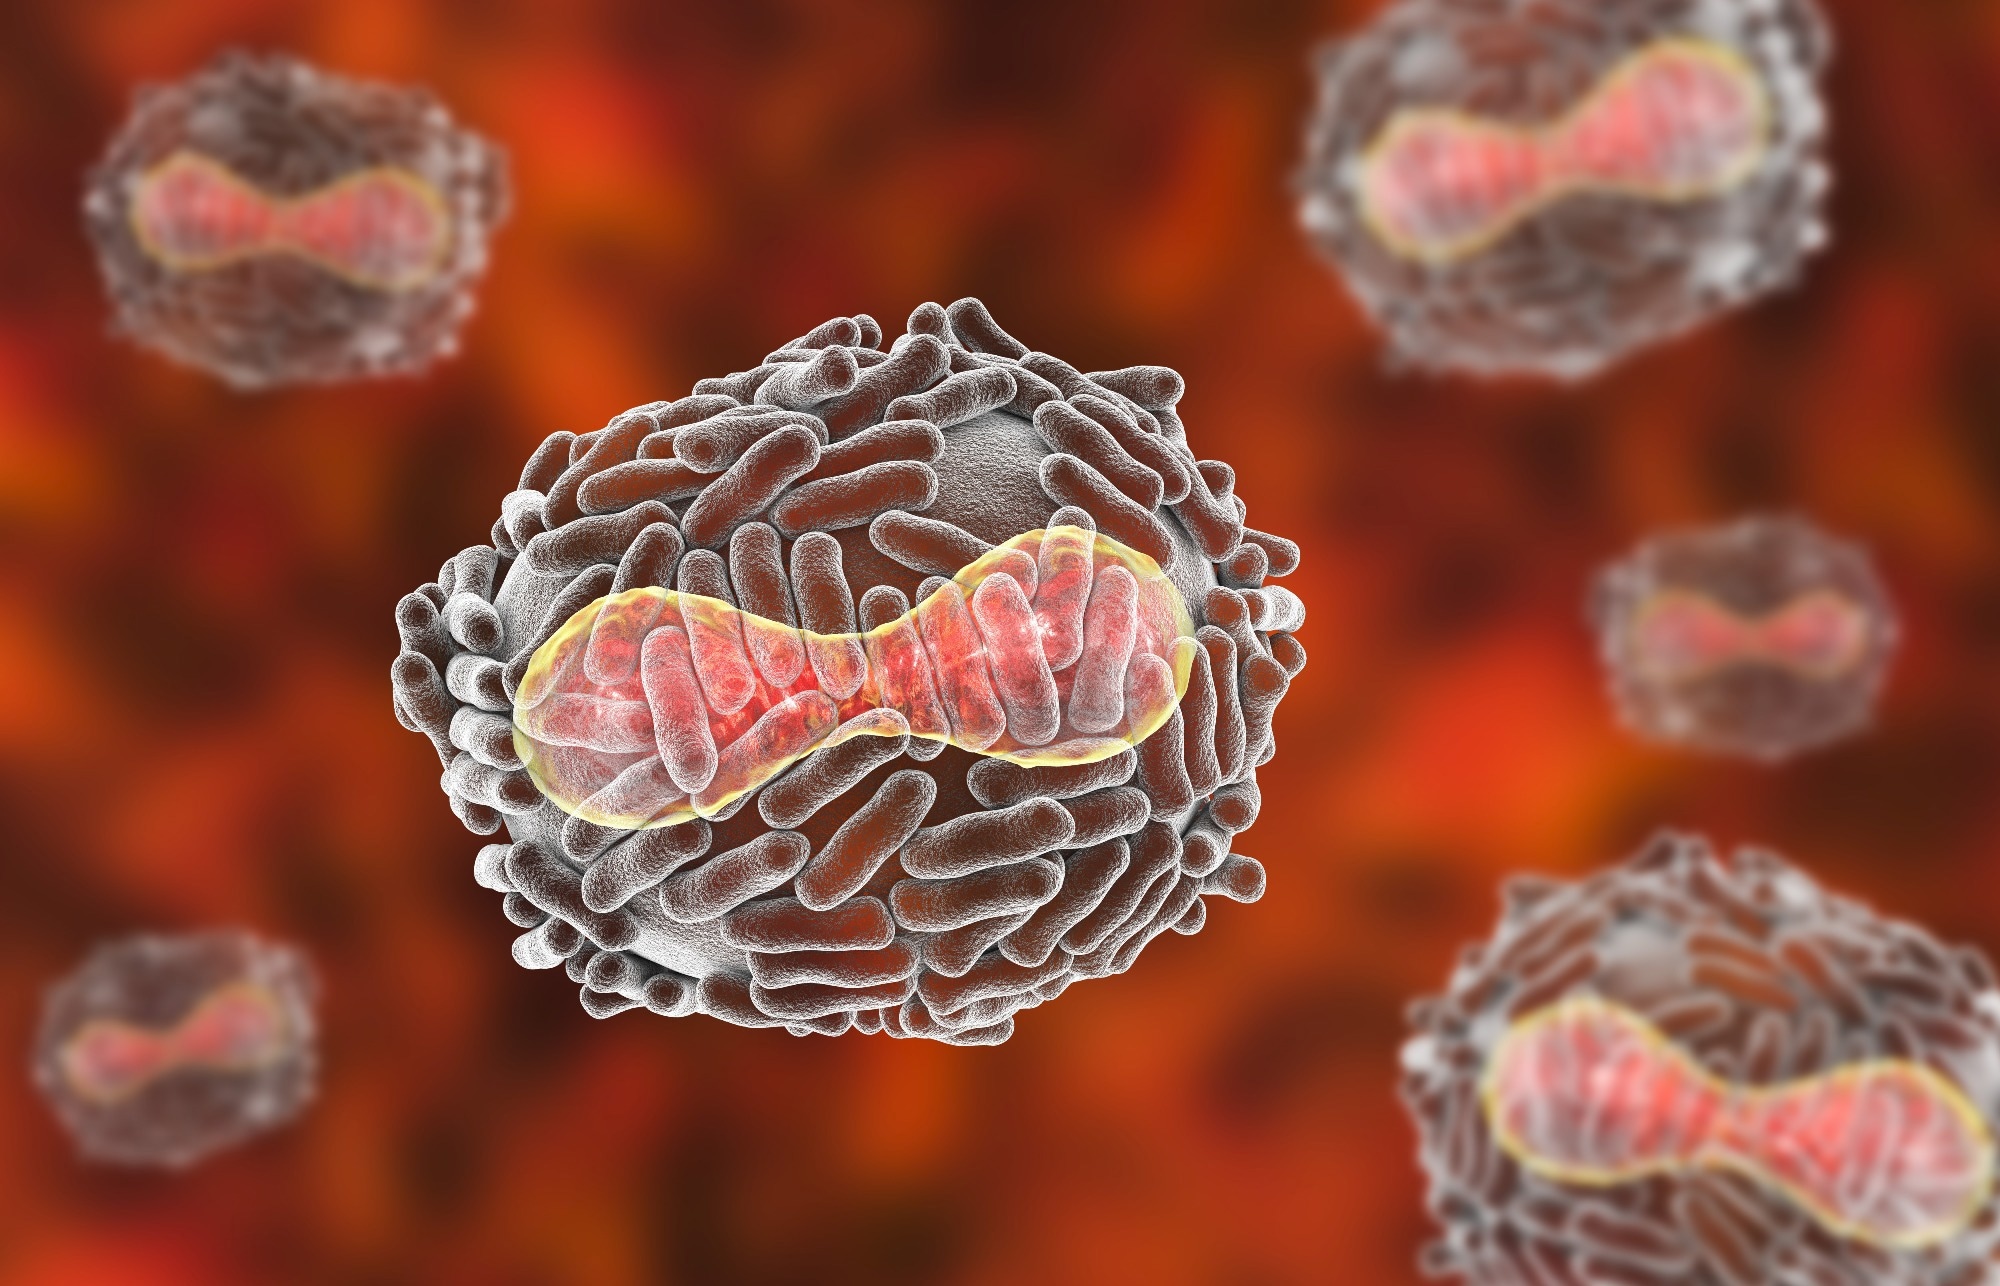 Study: A FACT-ETS-1 Antiviral Response Pathway Restricts Viral Replication and is Countered by Poxvirus A51R Proteins. Image Credit: Kateryna Kon / Shutterstock